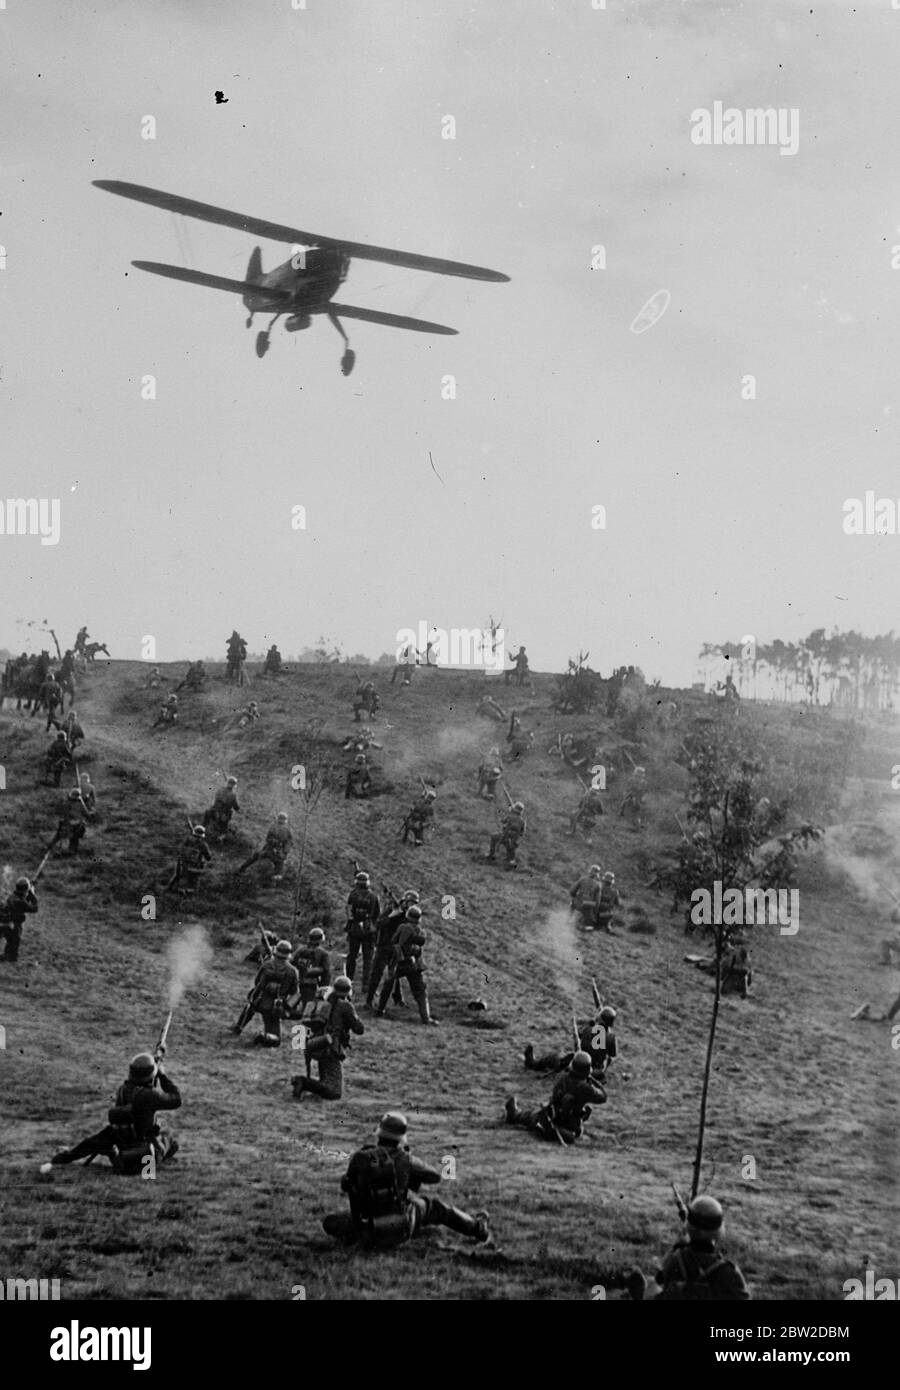 German warplanes, large number of troops and the Doberitz manoeuvre grounds were borrowed by the German UFS film company to stage spectacular battle scenes for a new film, Three NCOs which glorify the German army. Photo shows: The troops firing at attacking aircraft in the thrilling mimic battle for the film cameras. 19 October 1938 Stock Photo